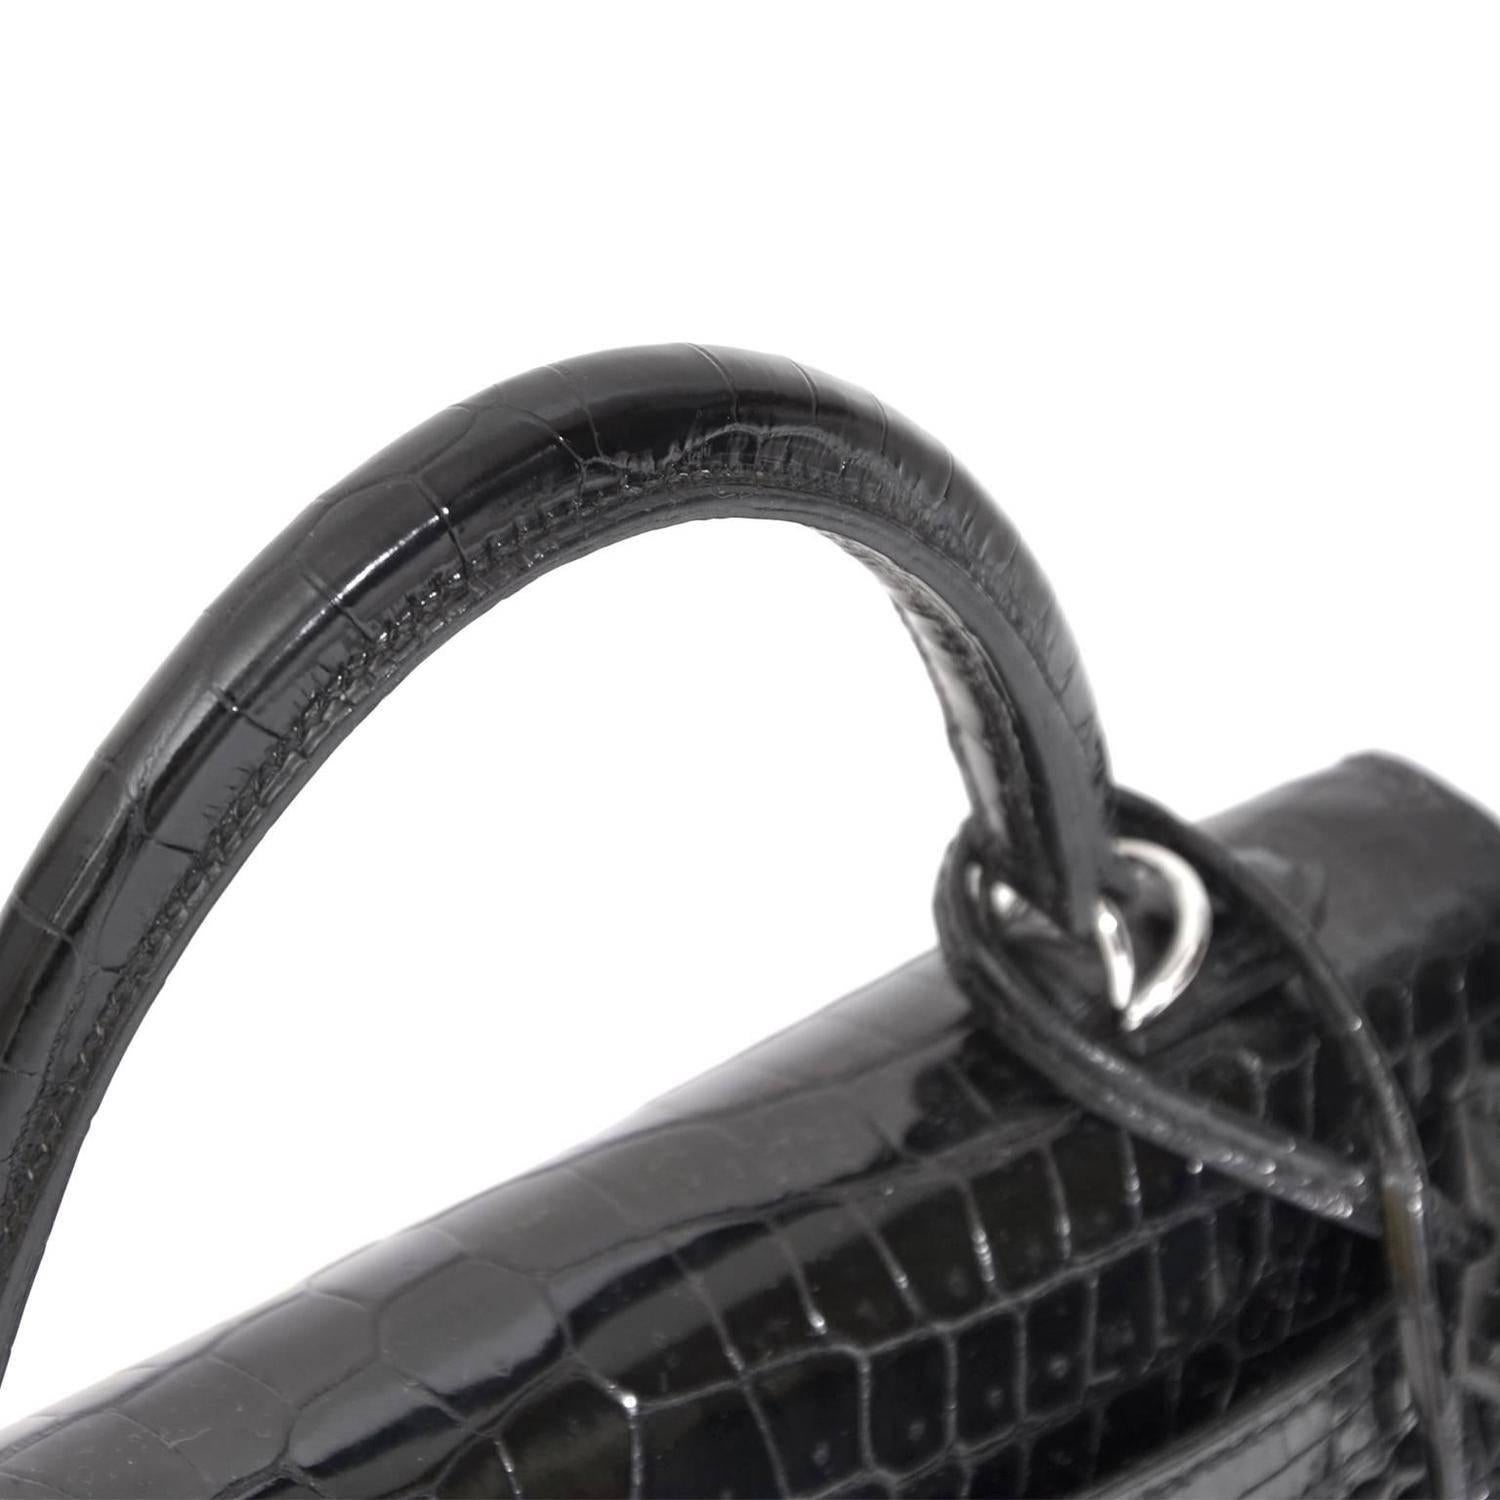 Super rare! This is a 25cm Black Crocodile Porosus Hermes Birkin bag. The bag contrast beautiful with its palladium hardware.
The plastic remains on the hardware and the bag is in new condition inside and out.
It will come in its Hermes sleeper with